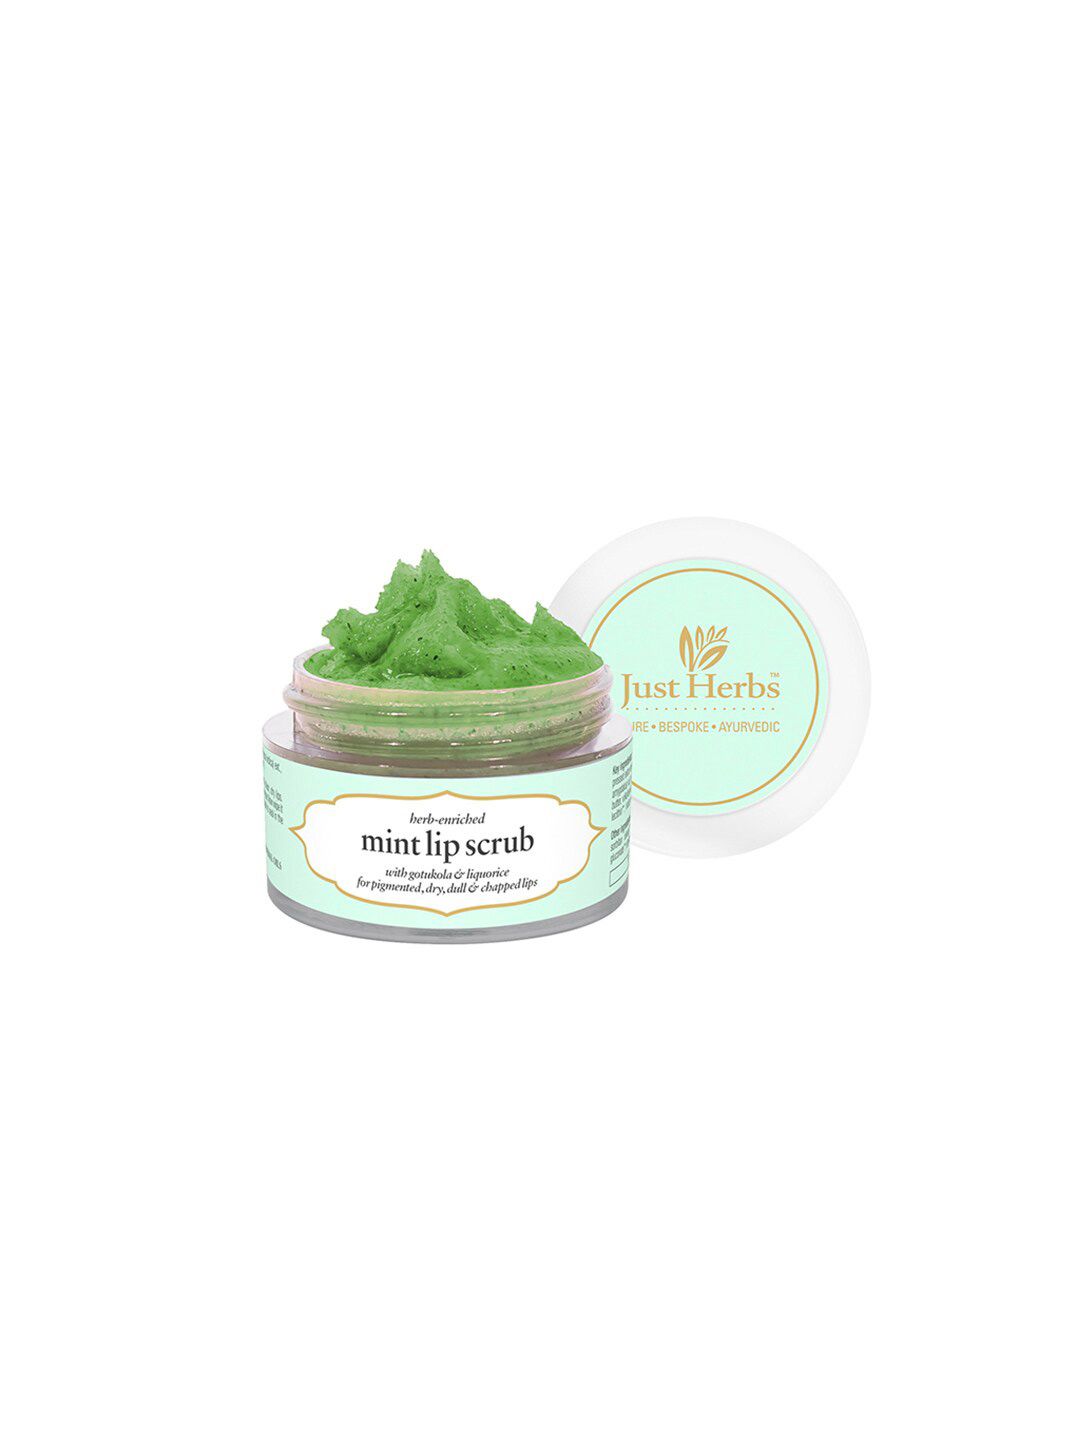 Just Herbs Mint Lip Scrub for Chapped, Pigmented & Dark lips, 15gms Price in India